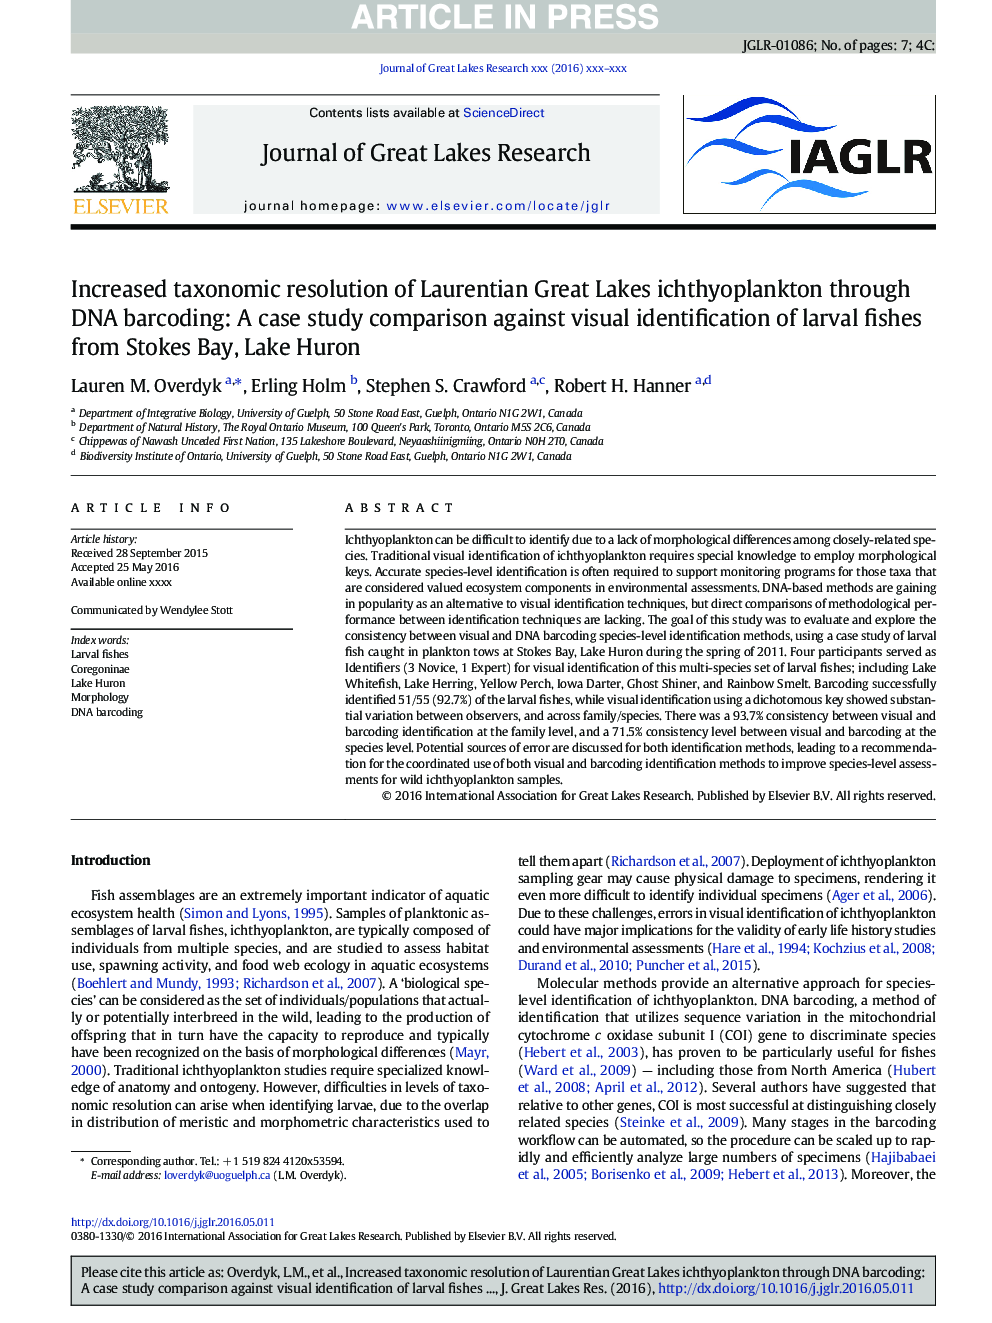 Increased taxonomic resolution of Laurentian Great Lakes ichthyoplankton through DNA barcoding: A case study comparison against visual identification of larval fishes from Stokes Bay, Lake Huron